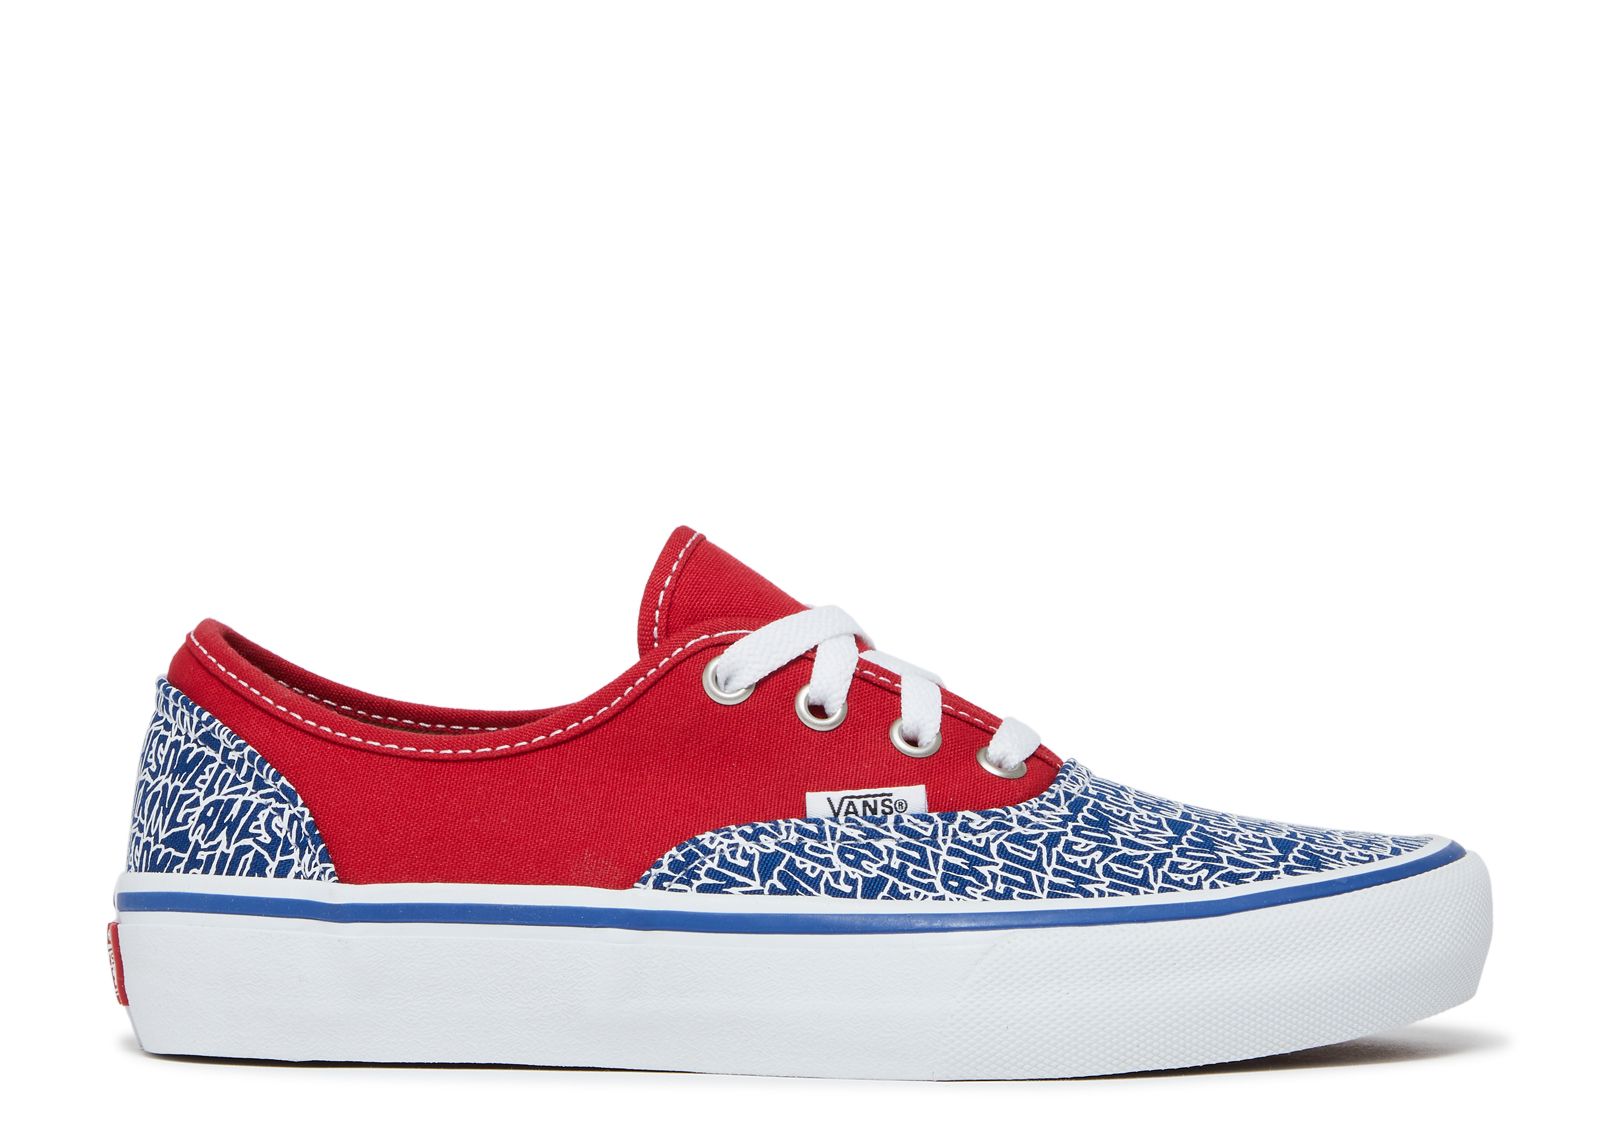 awesome Кроссовки Vans Fucking Awesome X Authentic C Pro 'Red Blue', красный